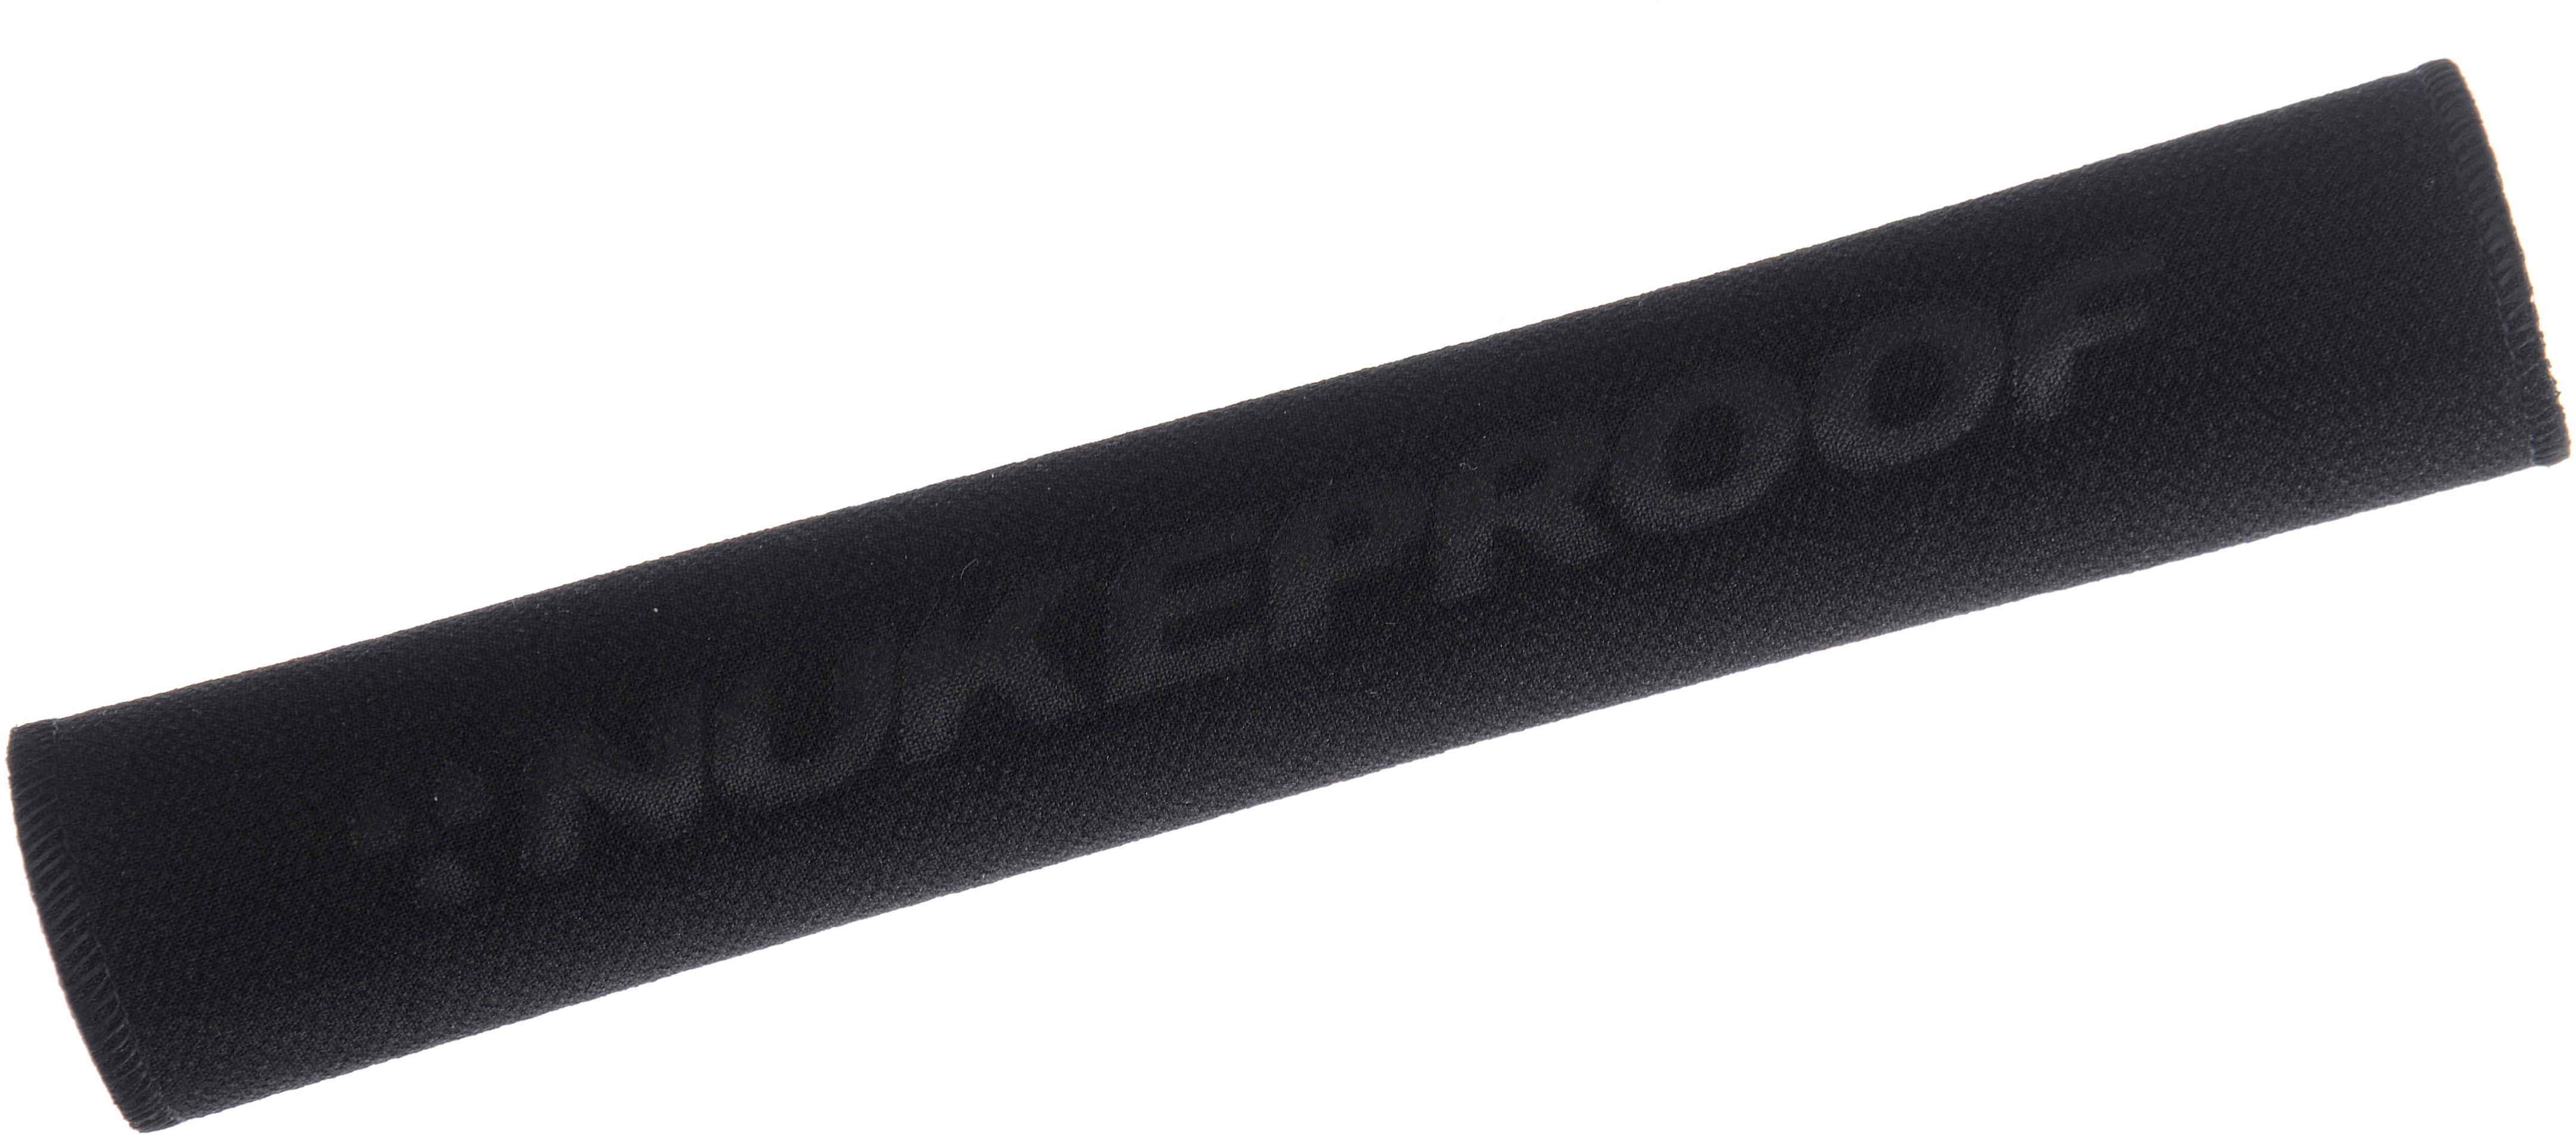 Nukeproof Kevlar Chainstay Protector  Black